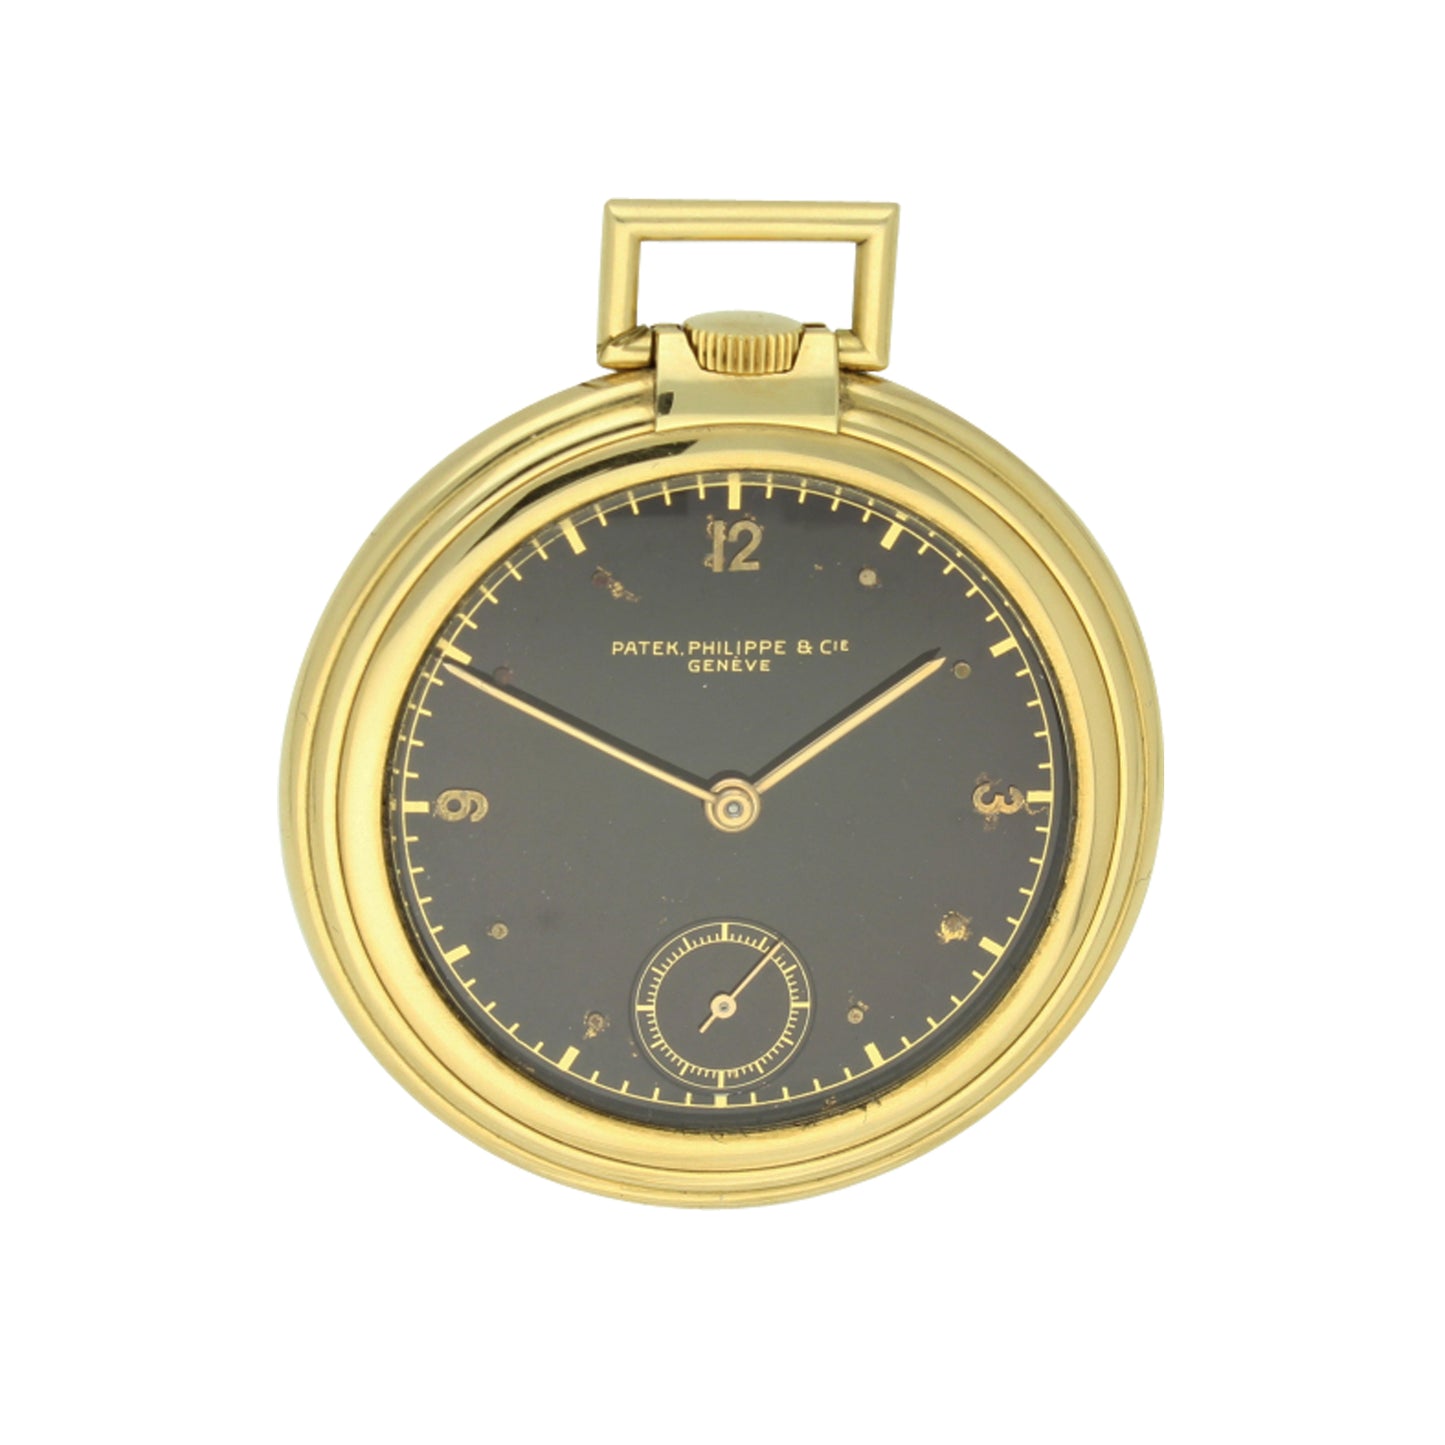 18ct yellow gold, reference 677 open face pocket watch. Made 1938